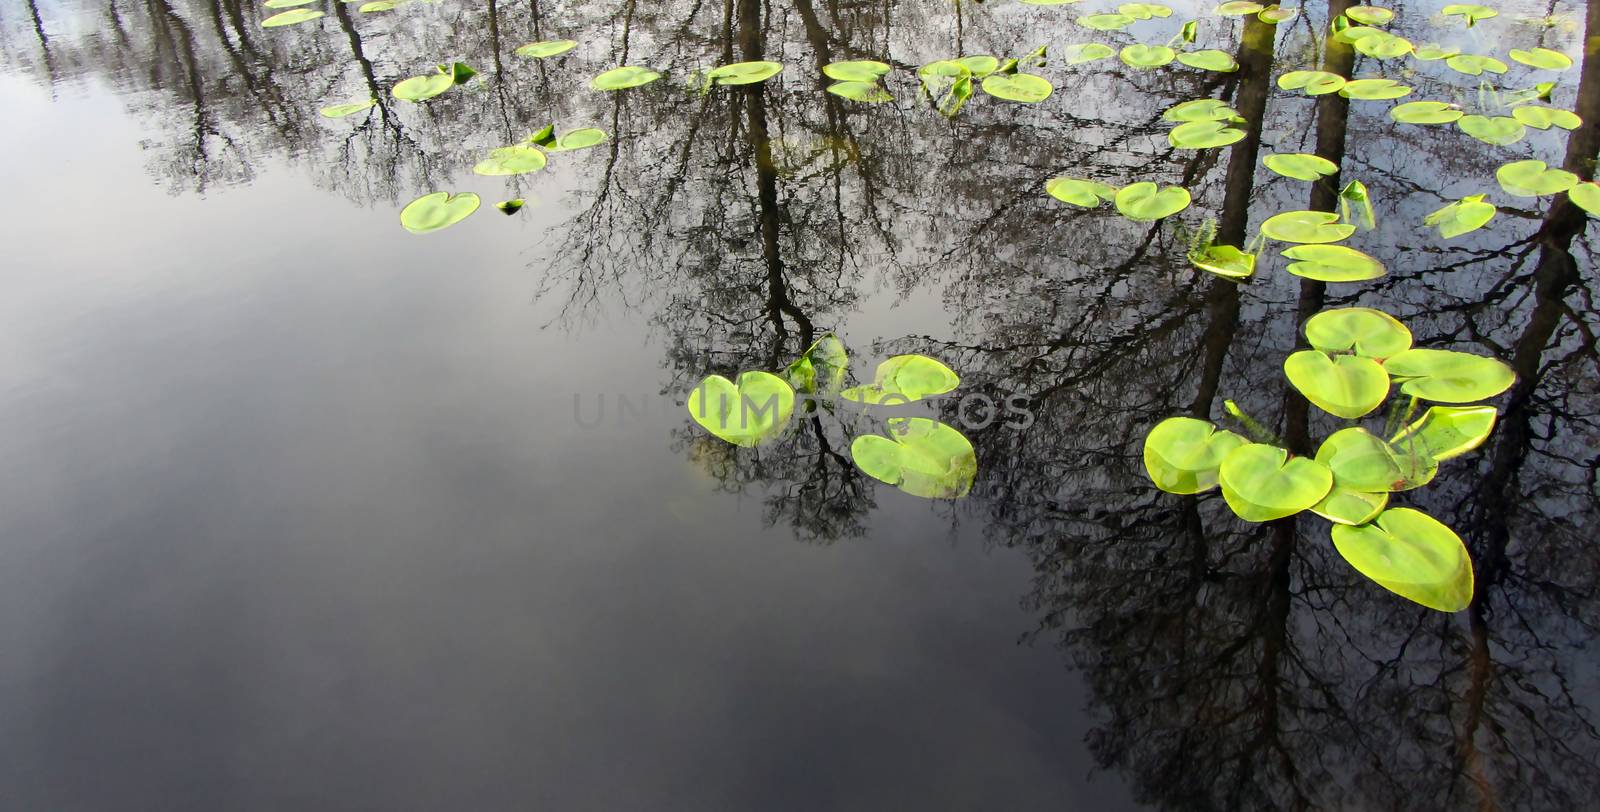 Lily pads on the surface of the pond by LanaLeta